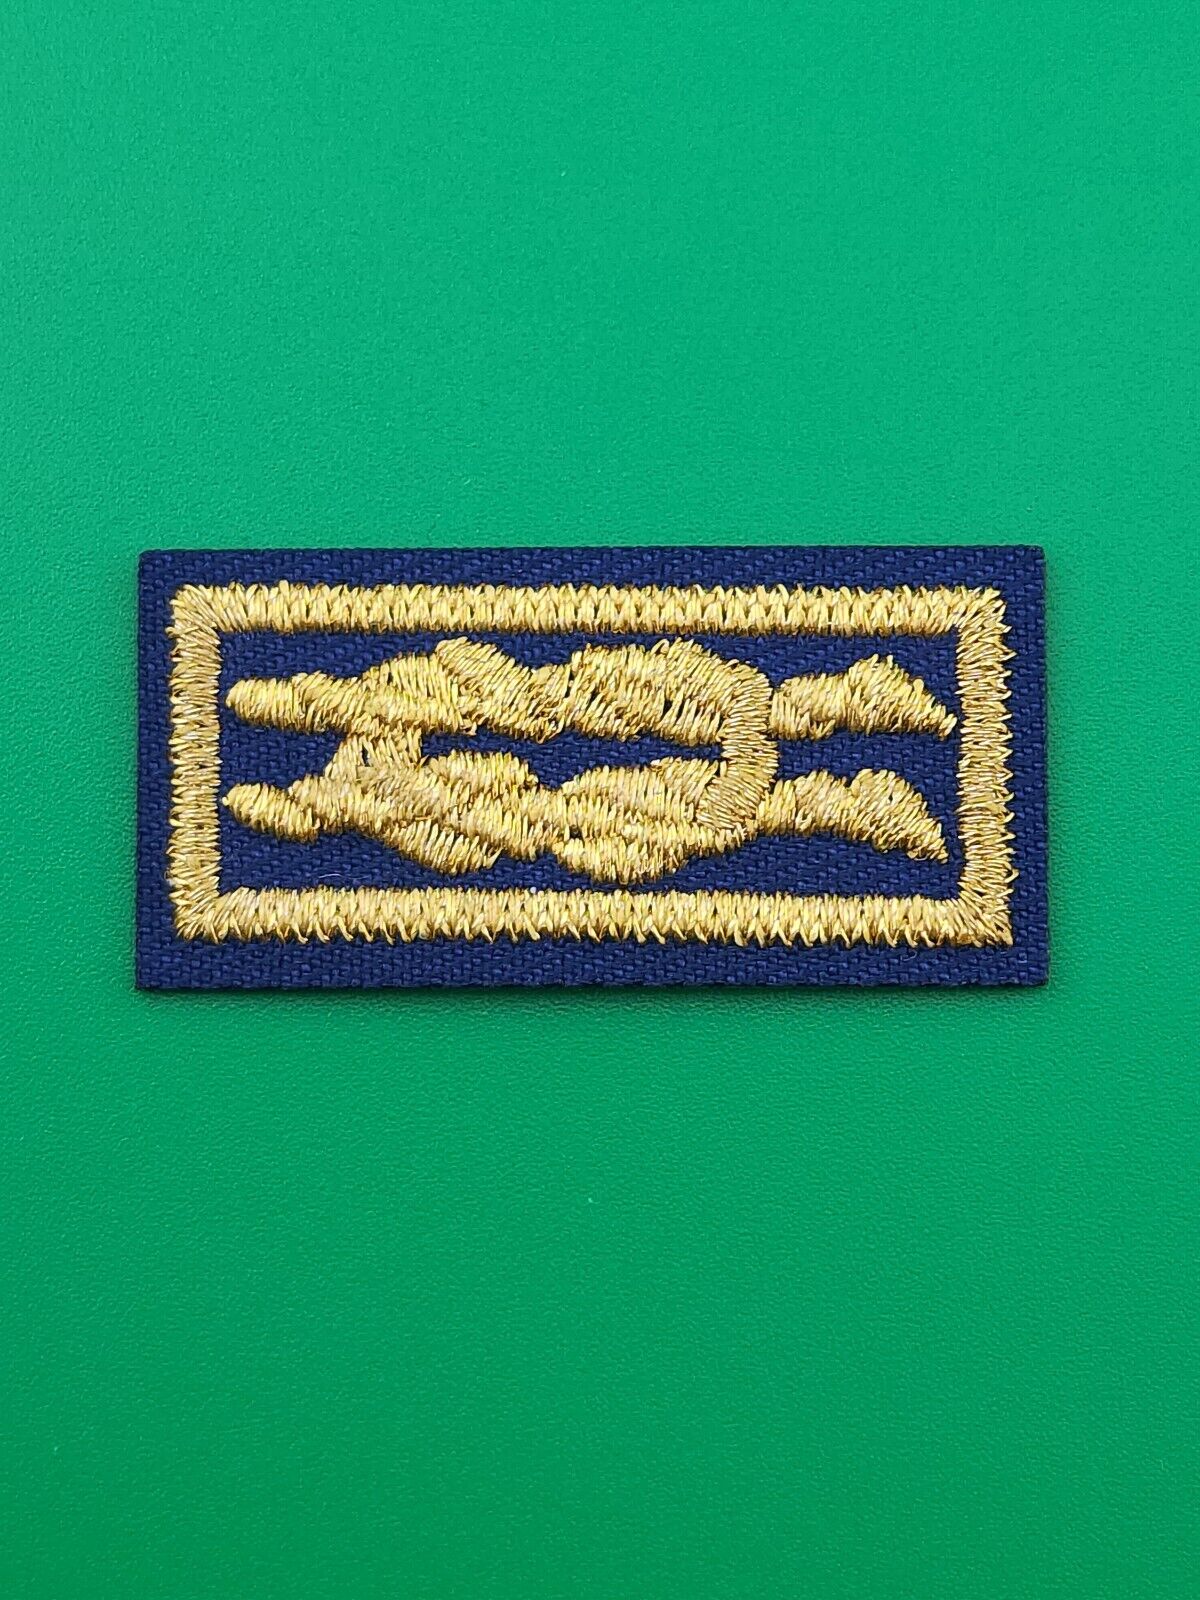 Unit Leader Award Of Merit Knot BSA Boy Scouts Of America *Brand New*